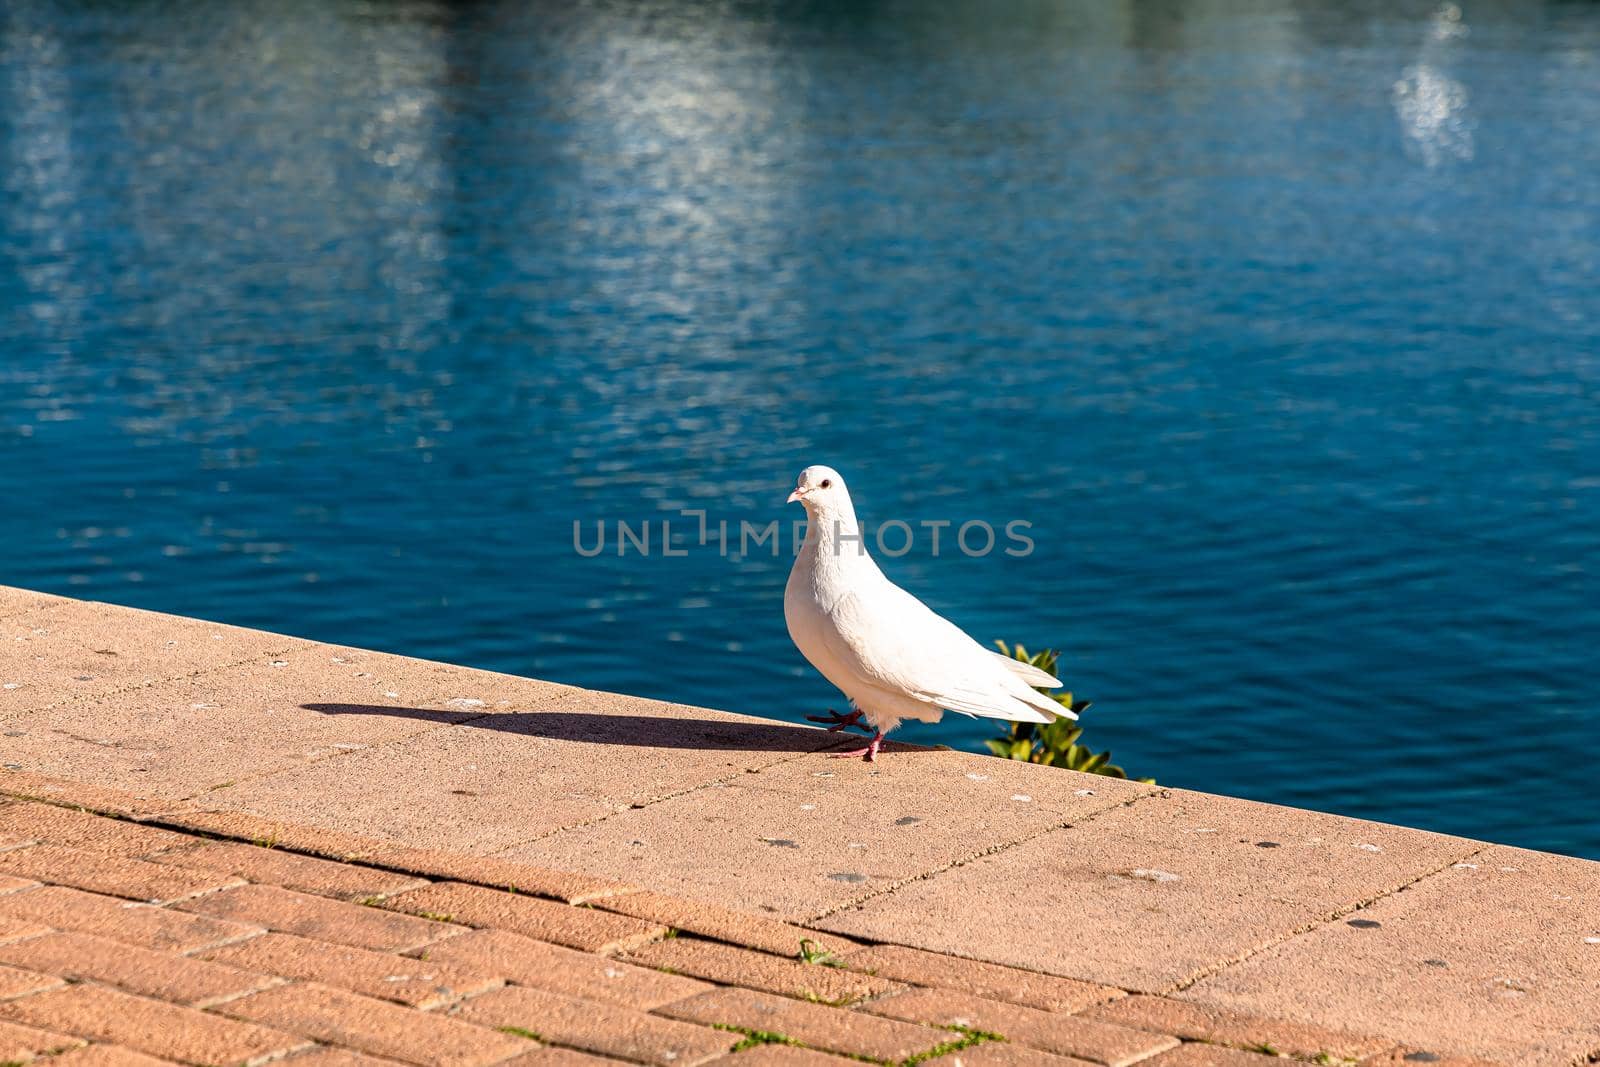 A white pigeon stands on the embankment against the background of the sea